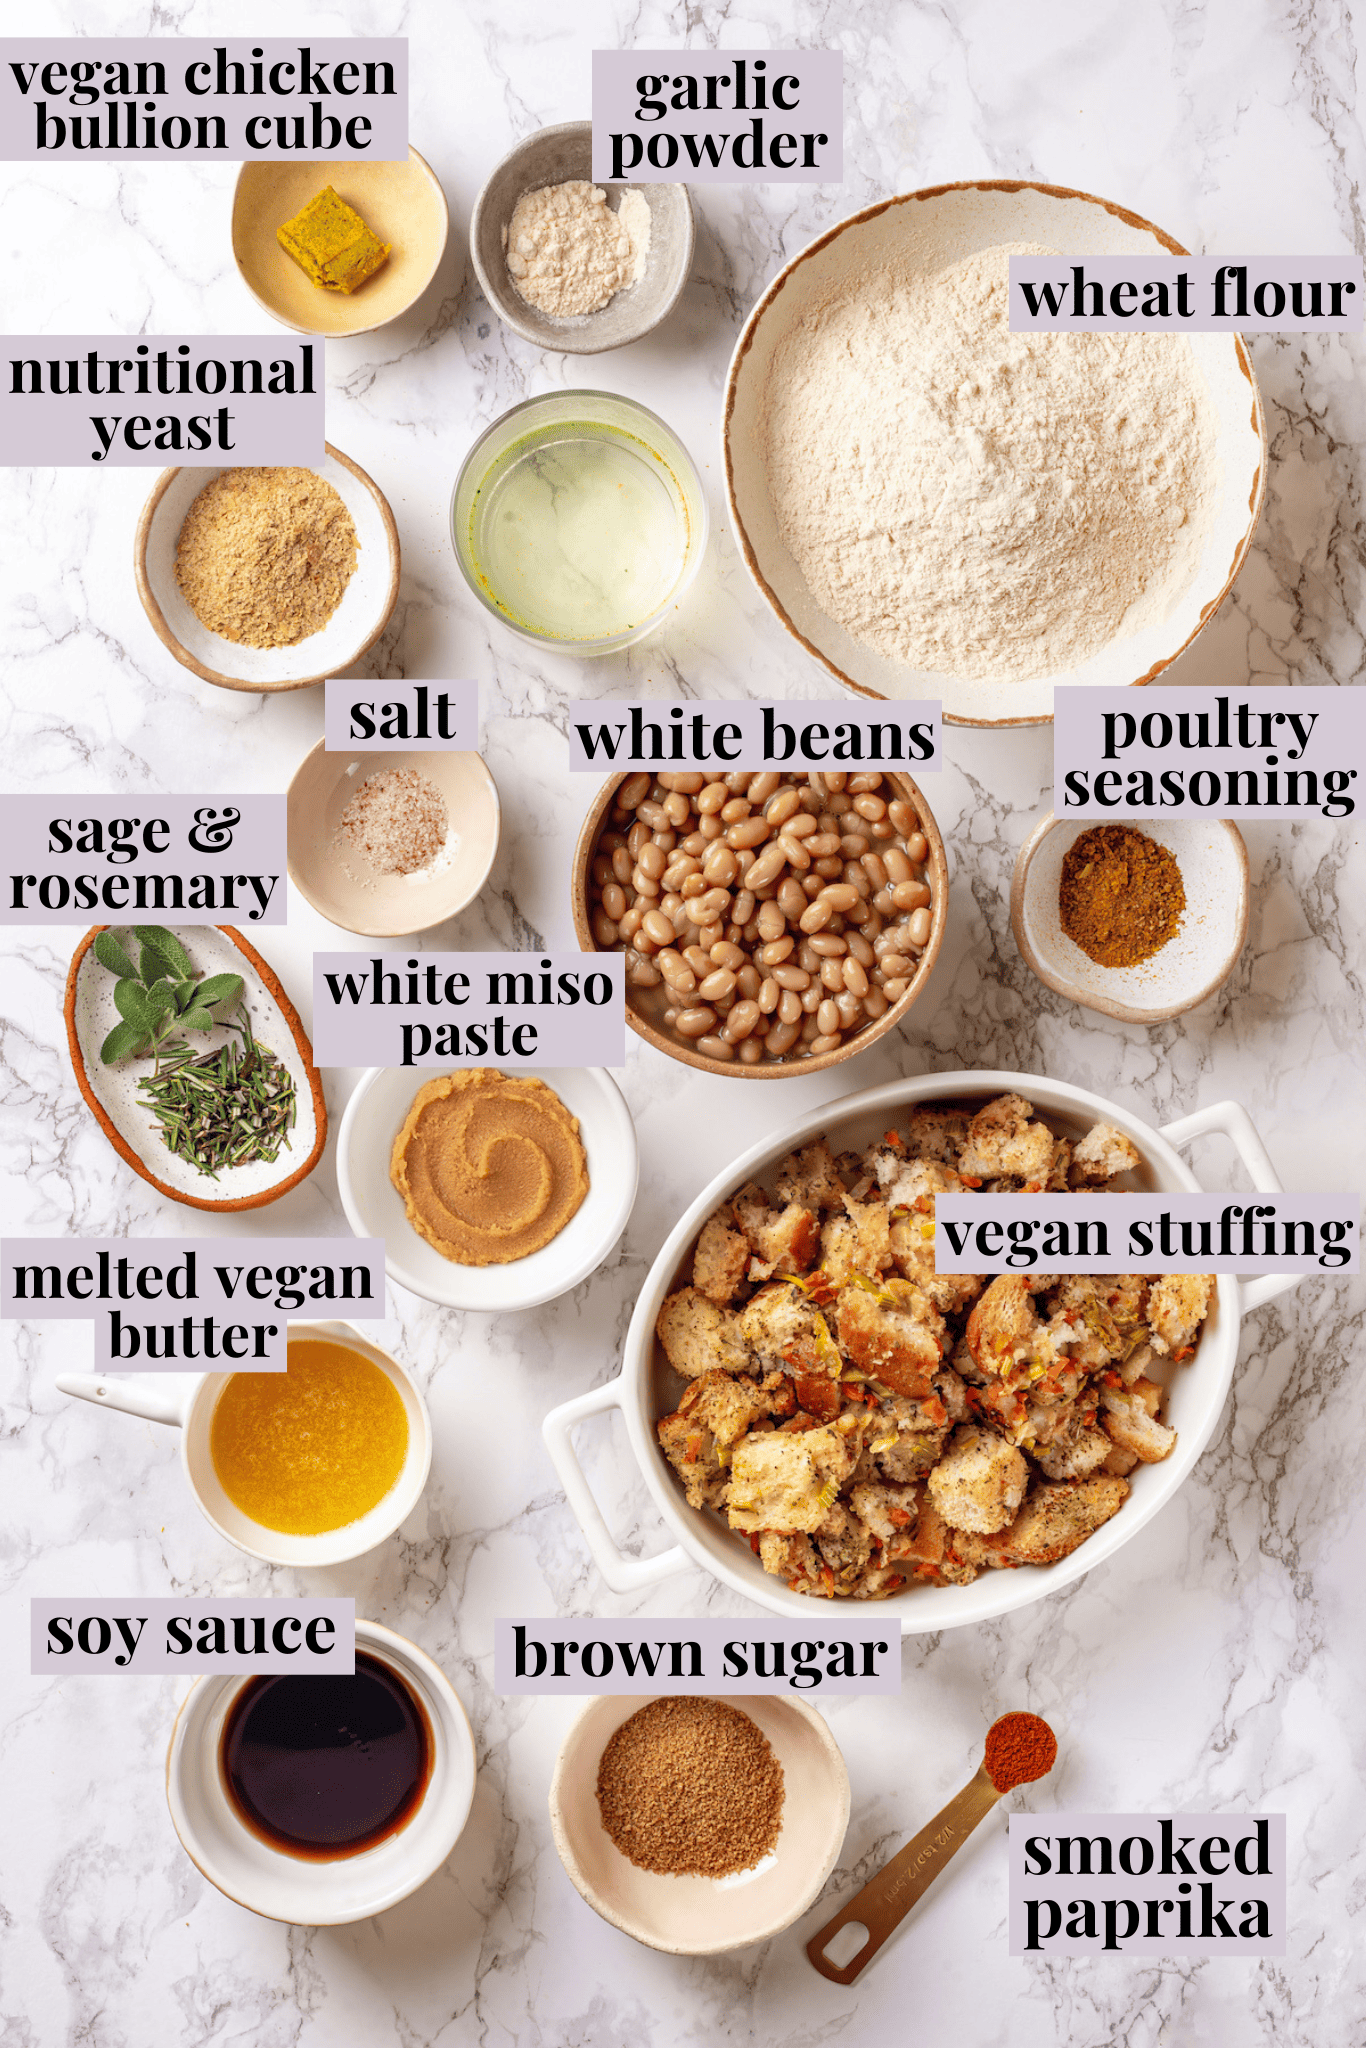 Overhead view of ingredients for vegan turkey with labels